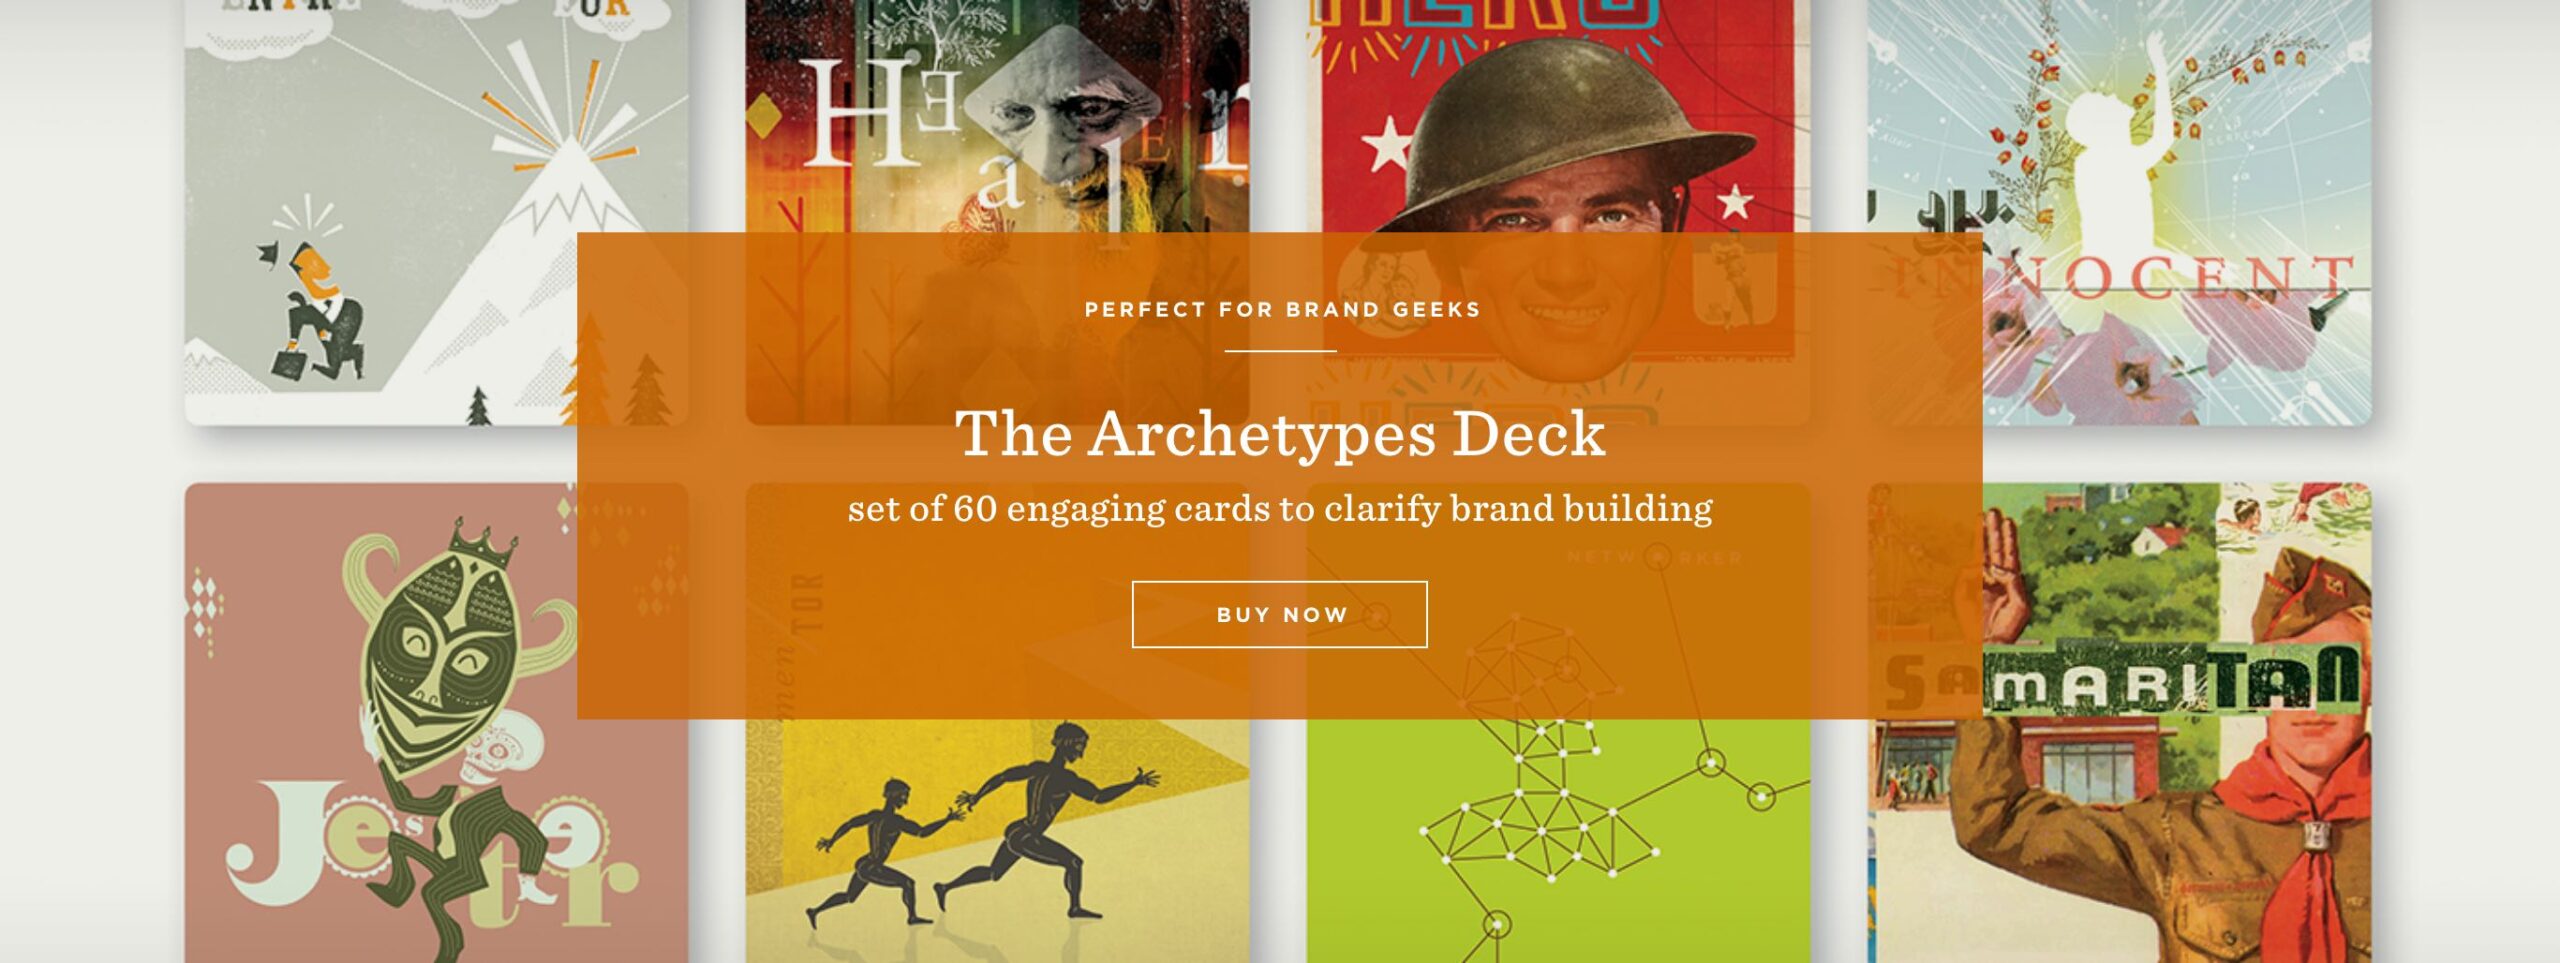 Perfect for brand geeks: The Archetypes Deck, set of 60 engaging cards to clarify brand building. Buy now